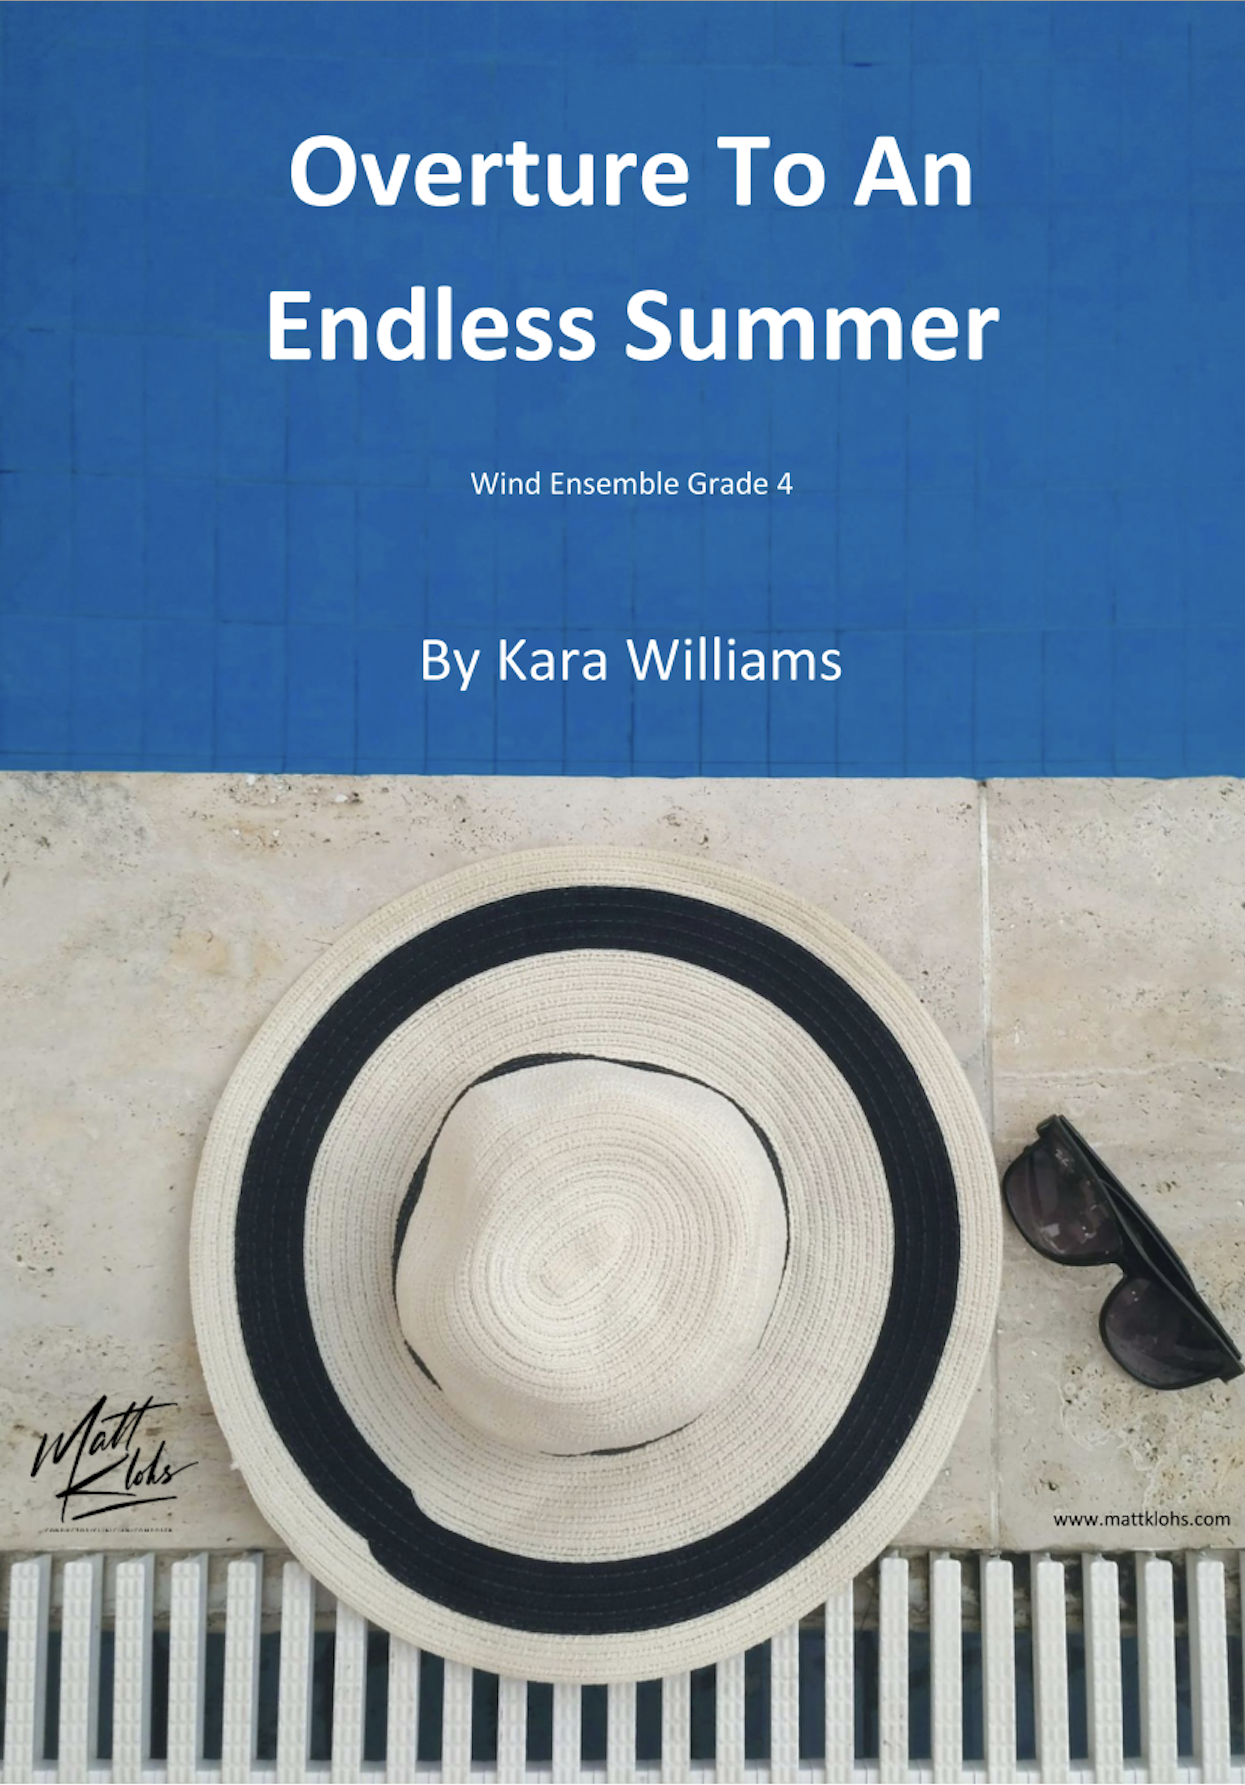 Overture To An Endless Summer by Kara Williams 